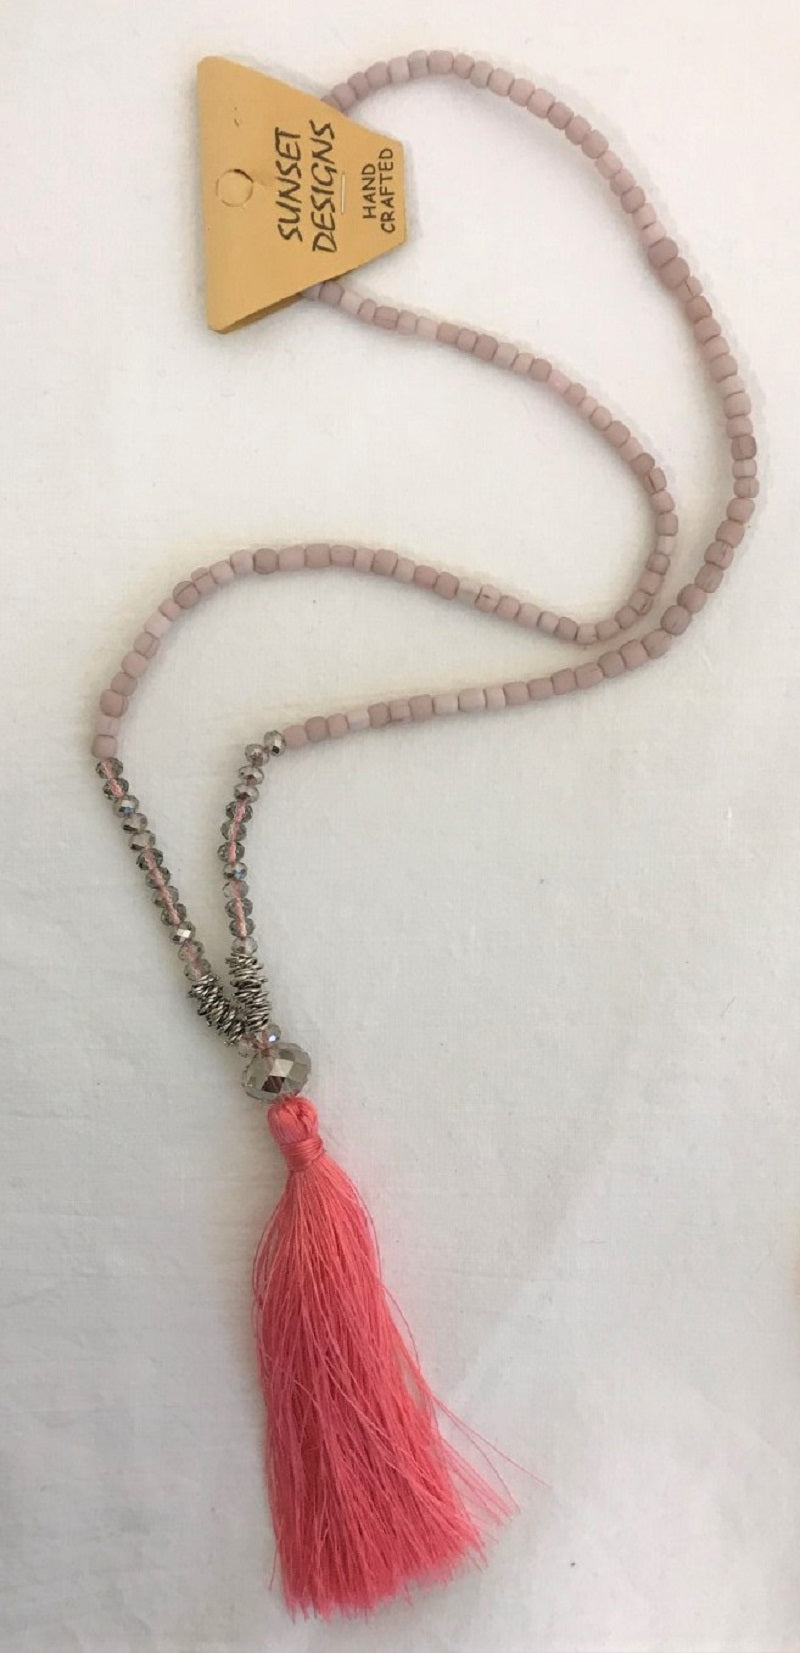 necklace - light pink - crystal beads clear & metal ring beads - light pink bead & tassle